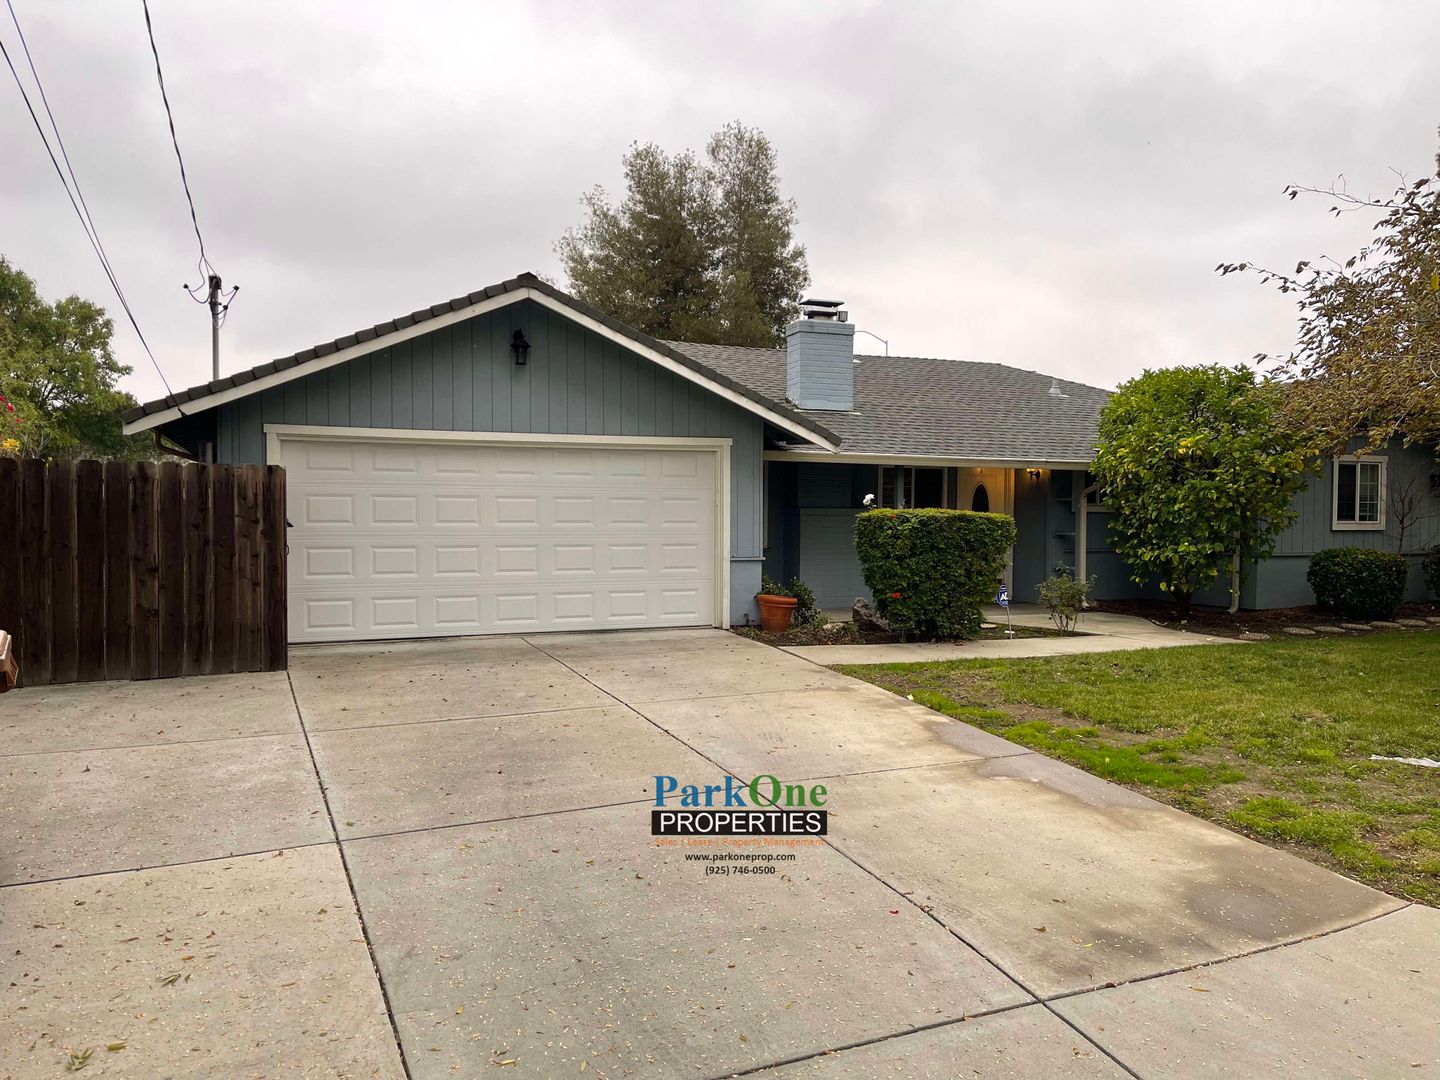 Great Pleasant Hill Location, Near Freeway, Shopping and Dining With Additional Detached Garage!